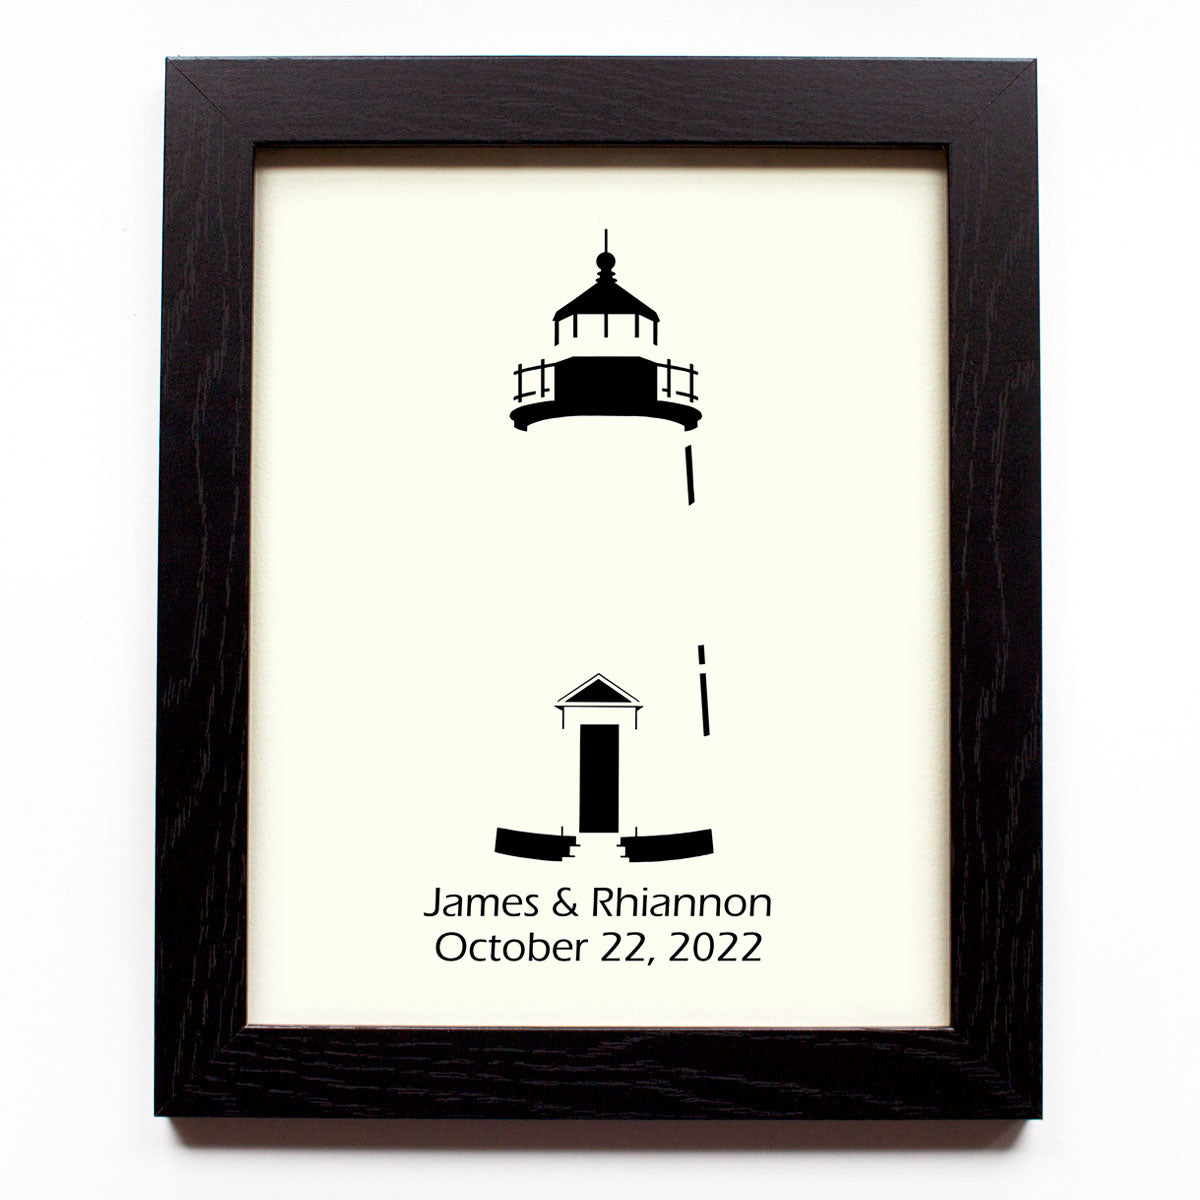 Framed simple black and white cut paper illustration of Cape Pogue Lighthouse on Chappaquiddick in Edgartown, Martha's Vineyard.